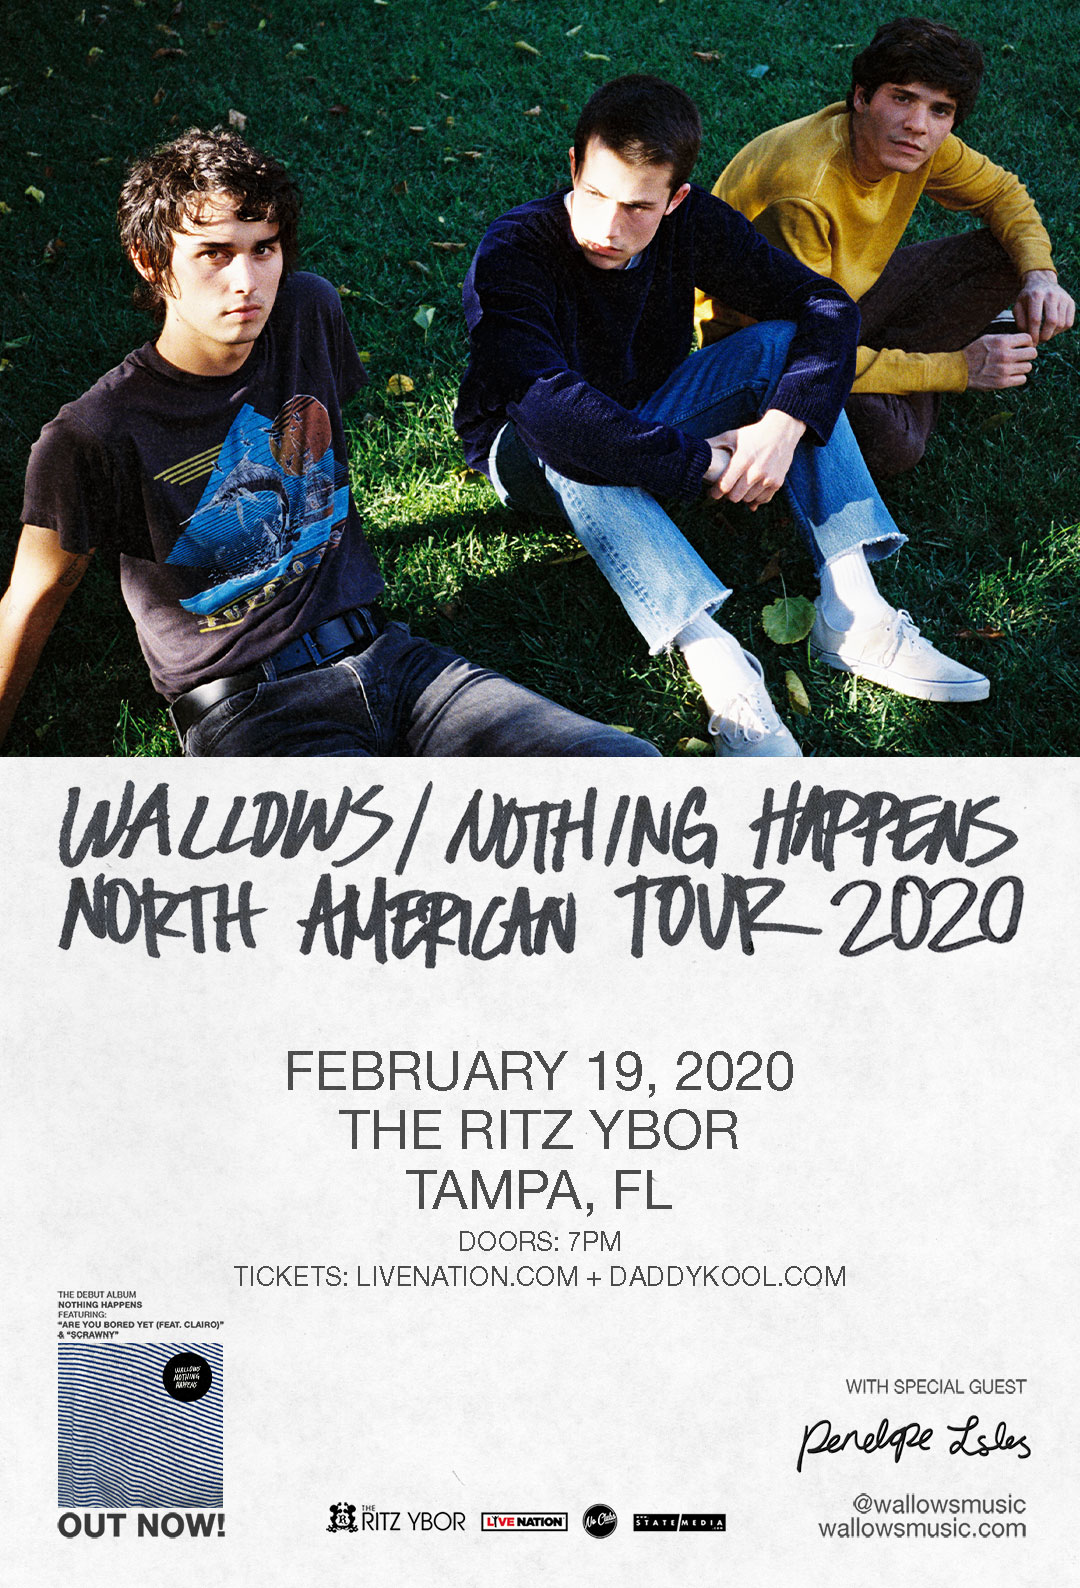 WALLOWS Nothing Happens Tour 2020 at The RITZ Ybor 2/19/2020